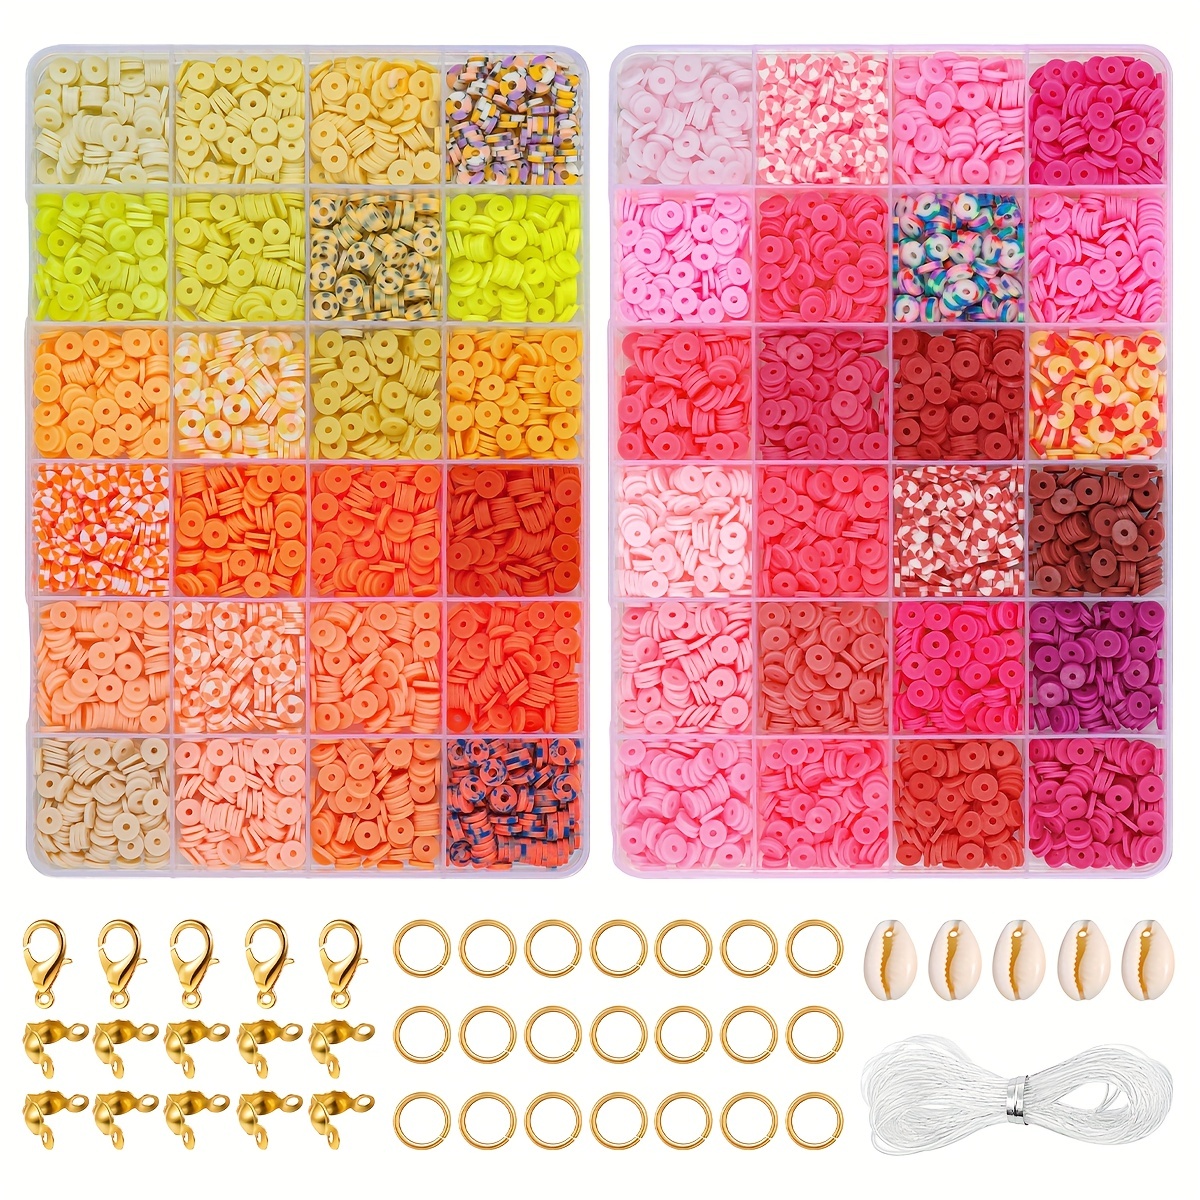  QUEFE 15350pcs, 72 Colors Clay Beads for Bracelet Making Kit, Jewelry  Making Kit for Girls 8-12, Polymer Heishi Beads, Letter Beads for Jewelry  Making, for Gifts, Crafts, Preppy : Arts, Crafts